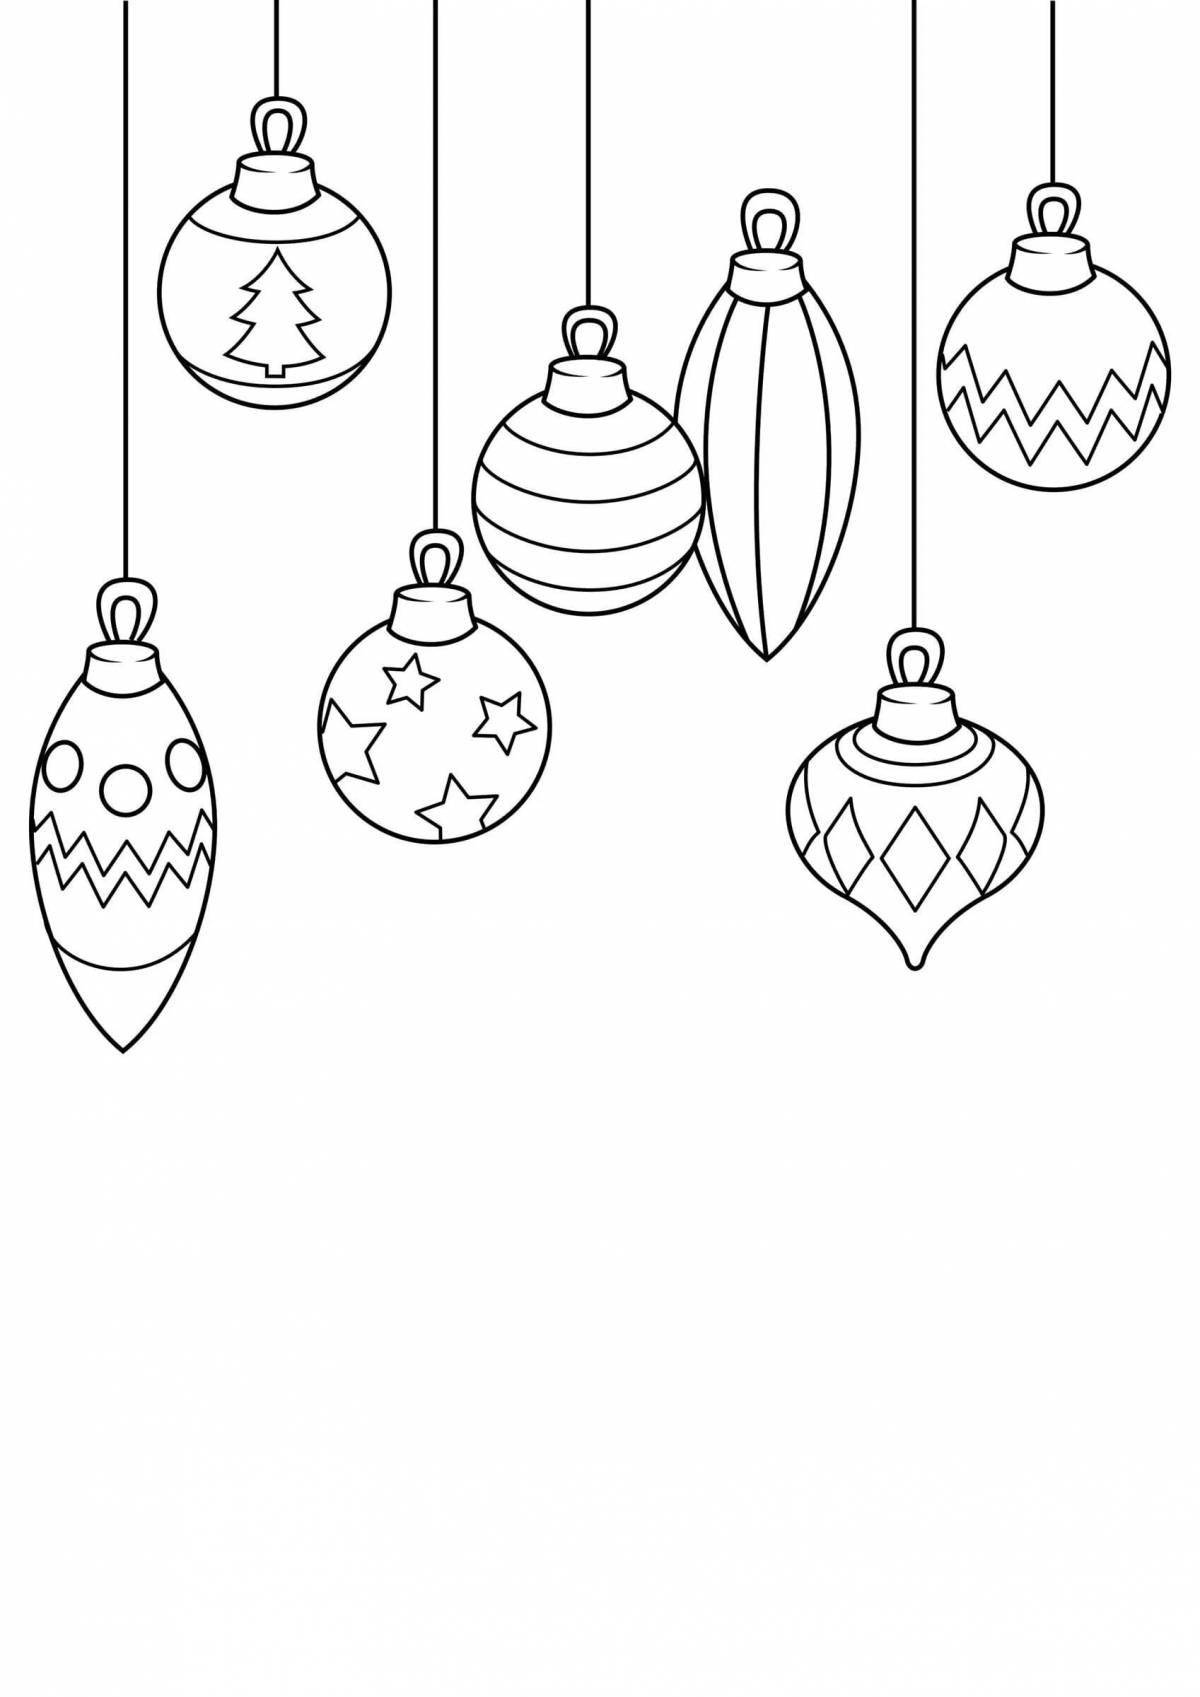 Coloring page adorable Christmas decorations